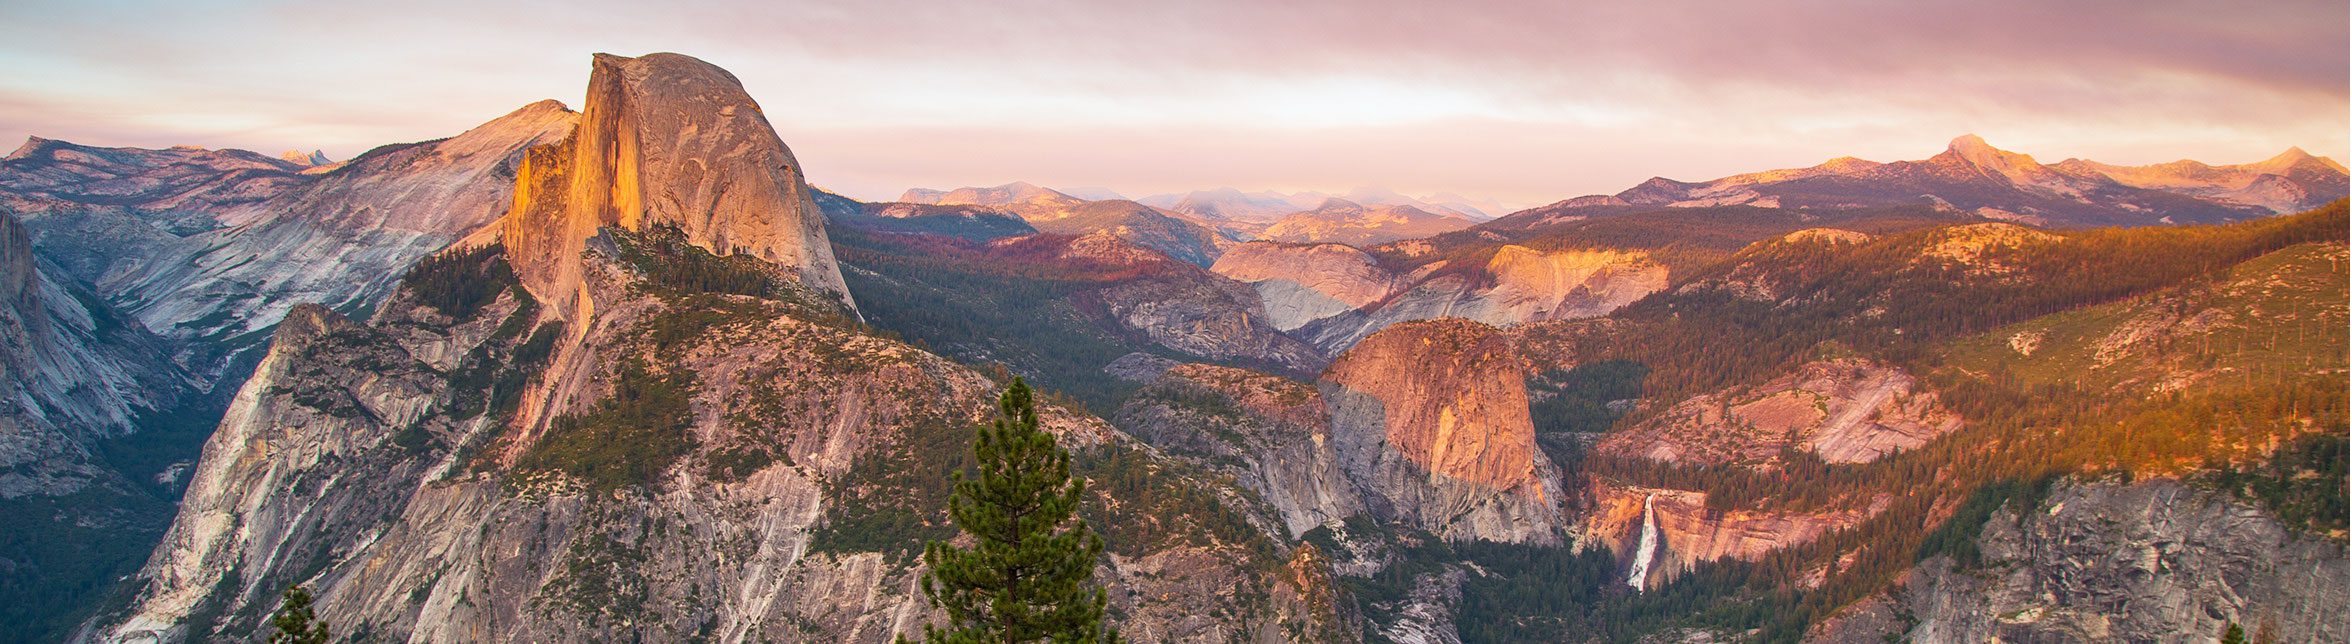 Half Dome in Yosemite Valley at sunset